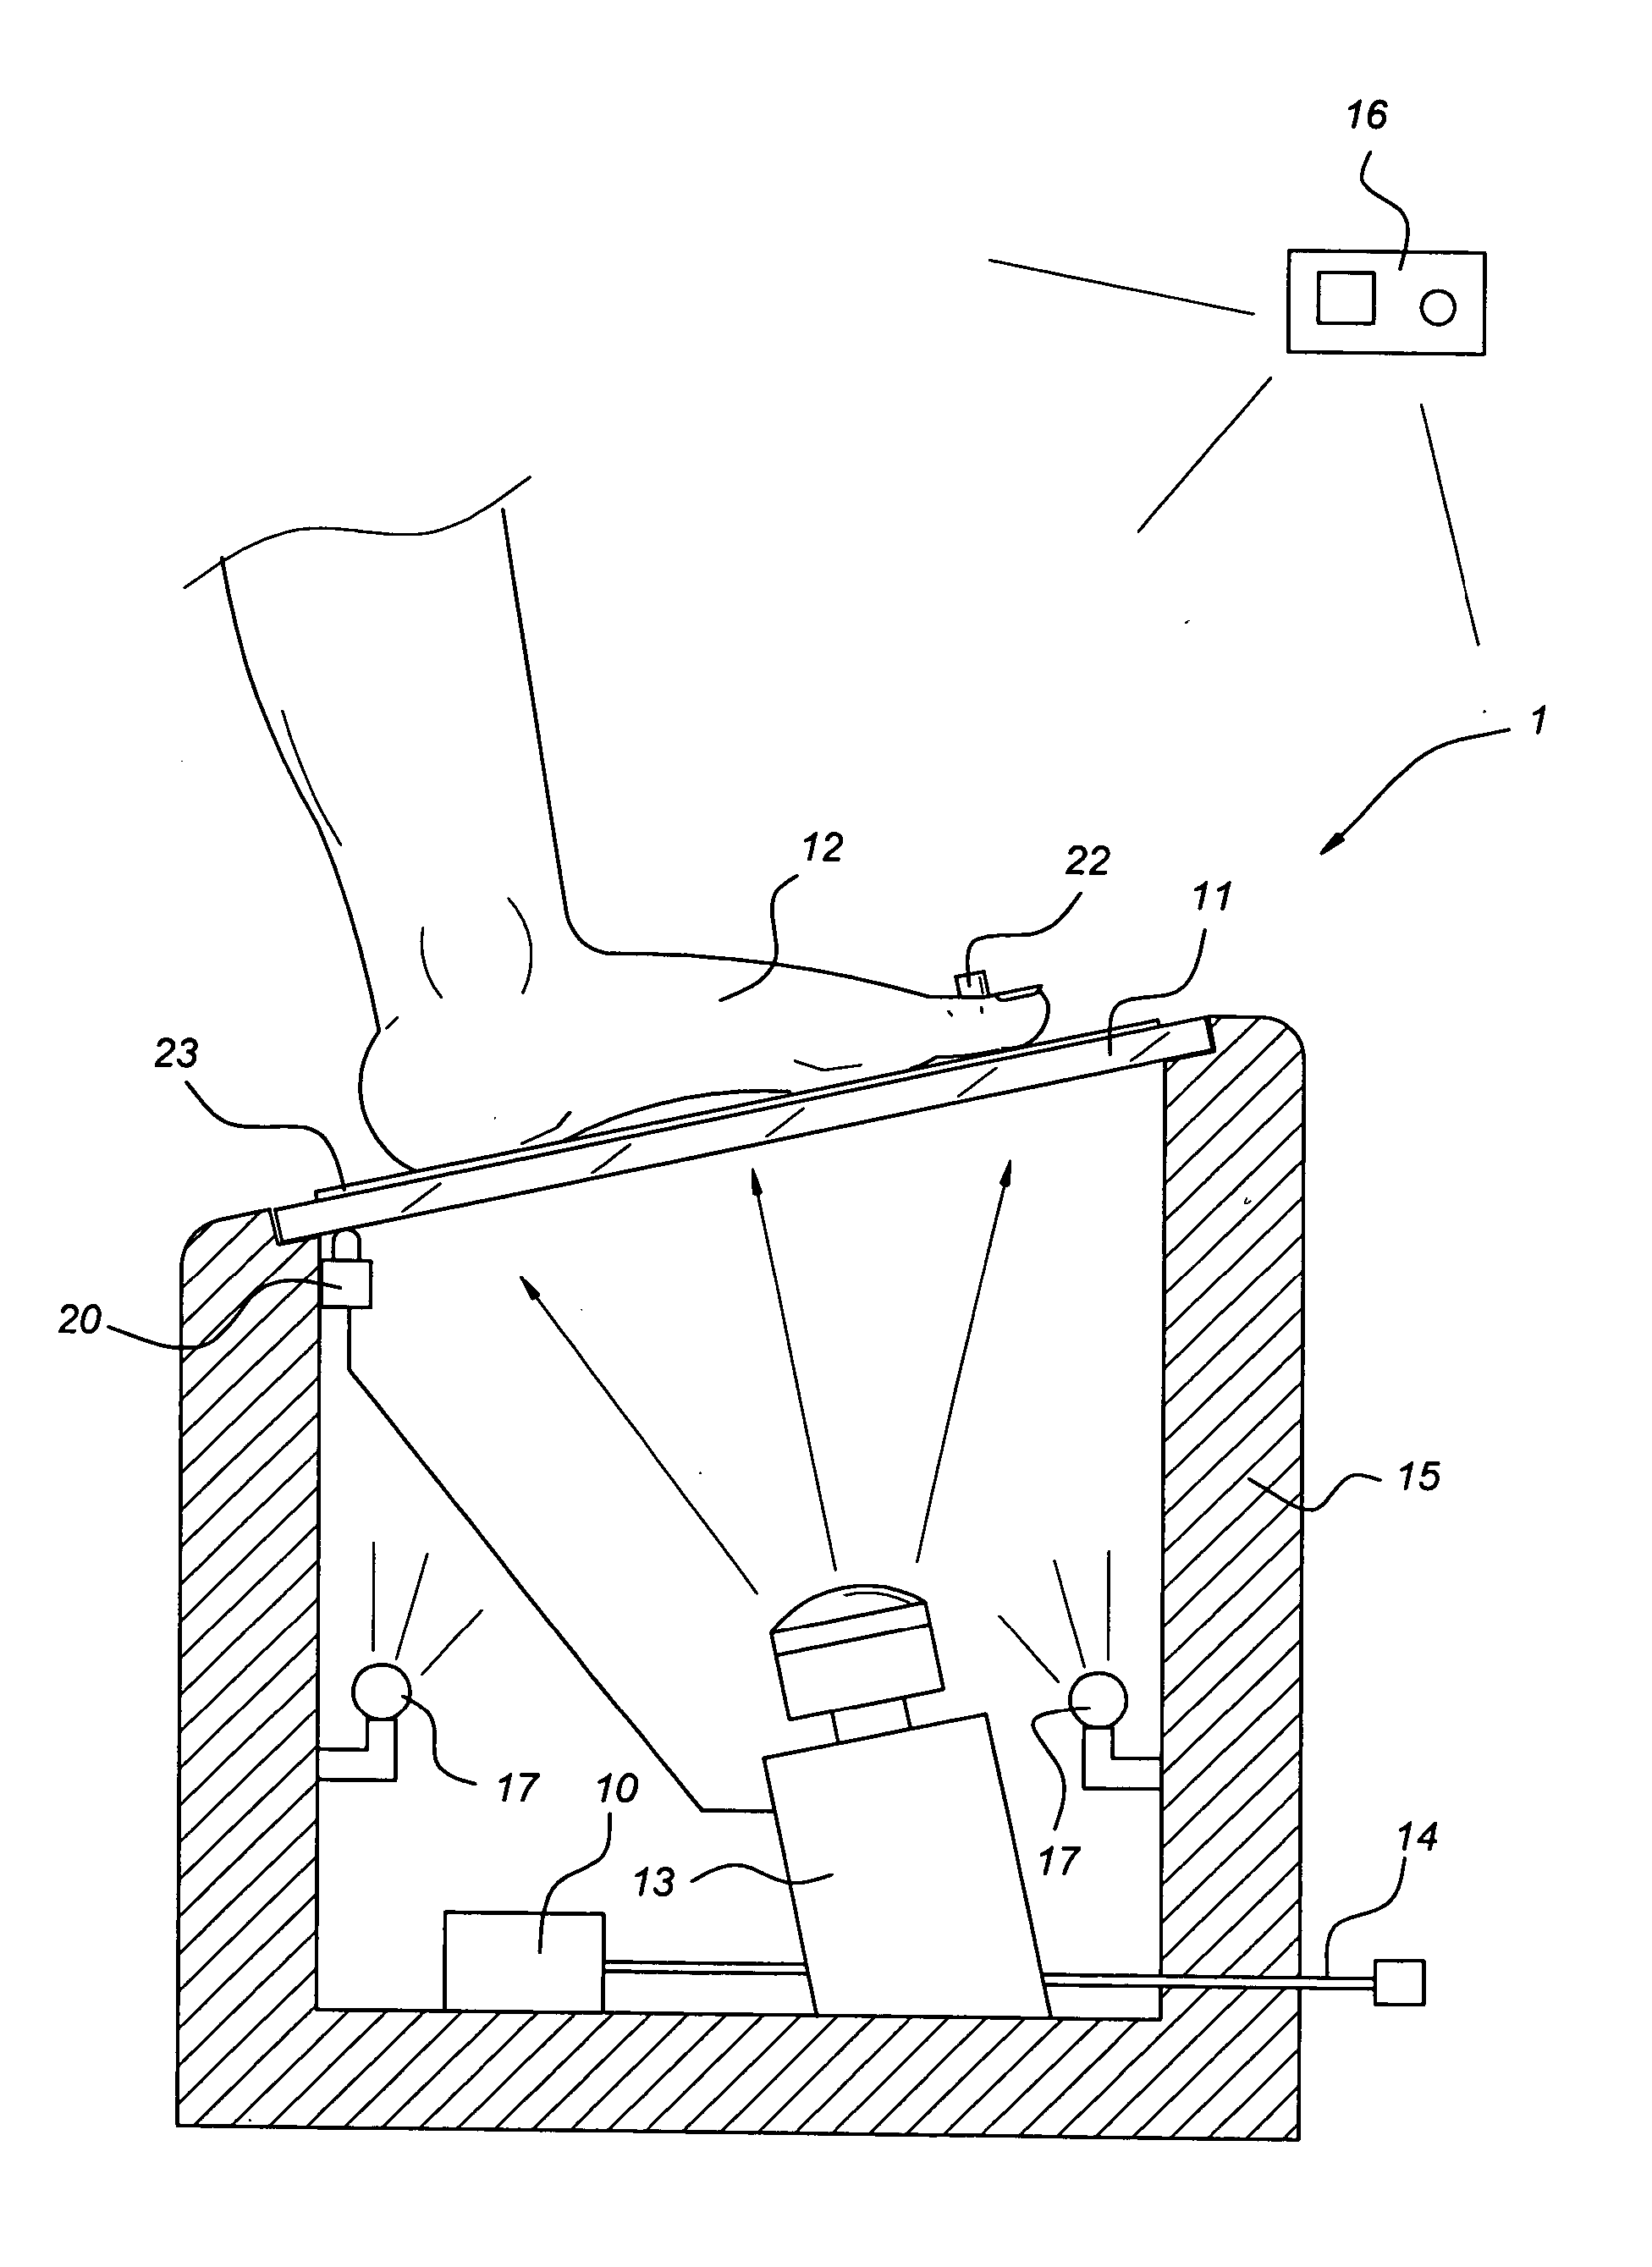 Device and method for examining a diabetic foot